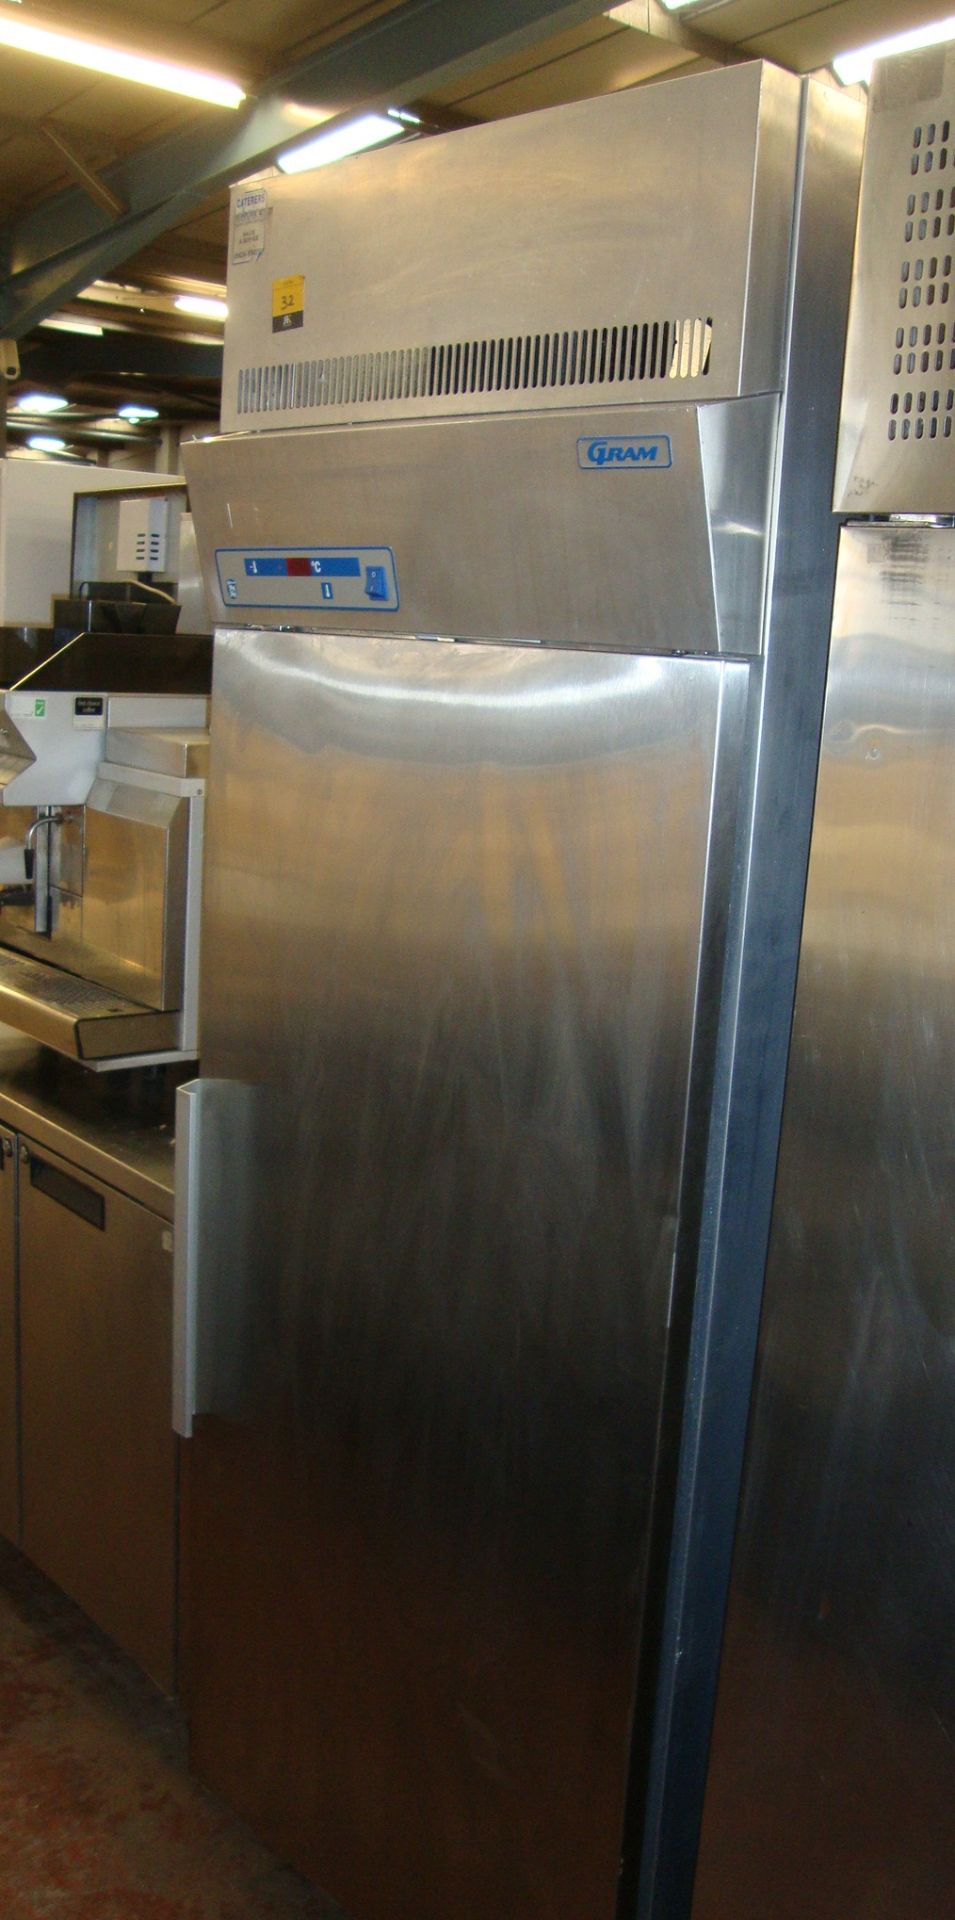 Gram F600 OPRHSE stainless steel mobile tall freezer - Image 4 of 4